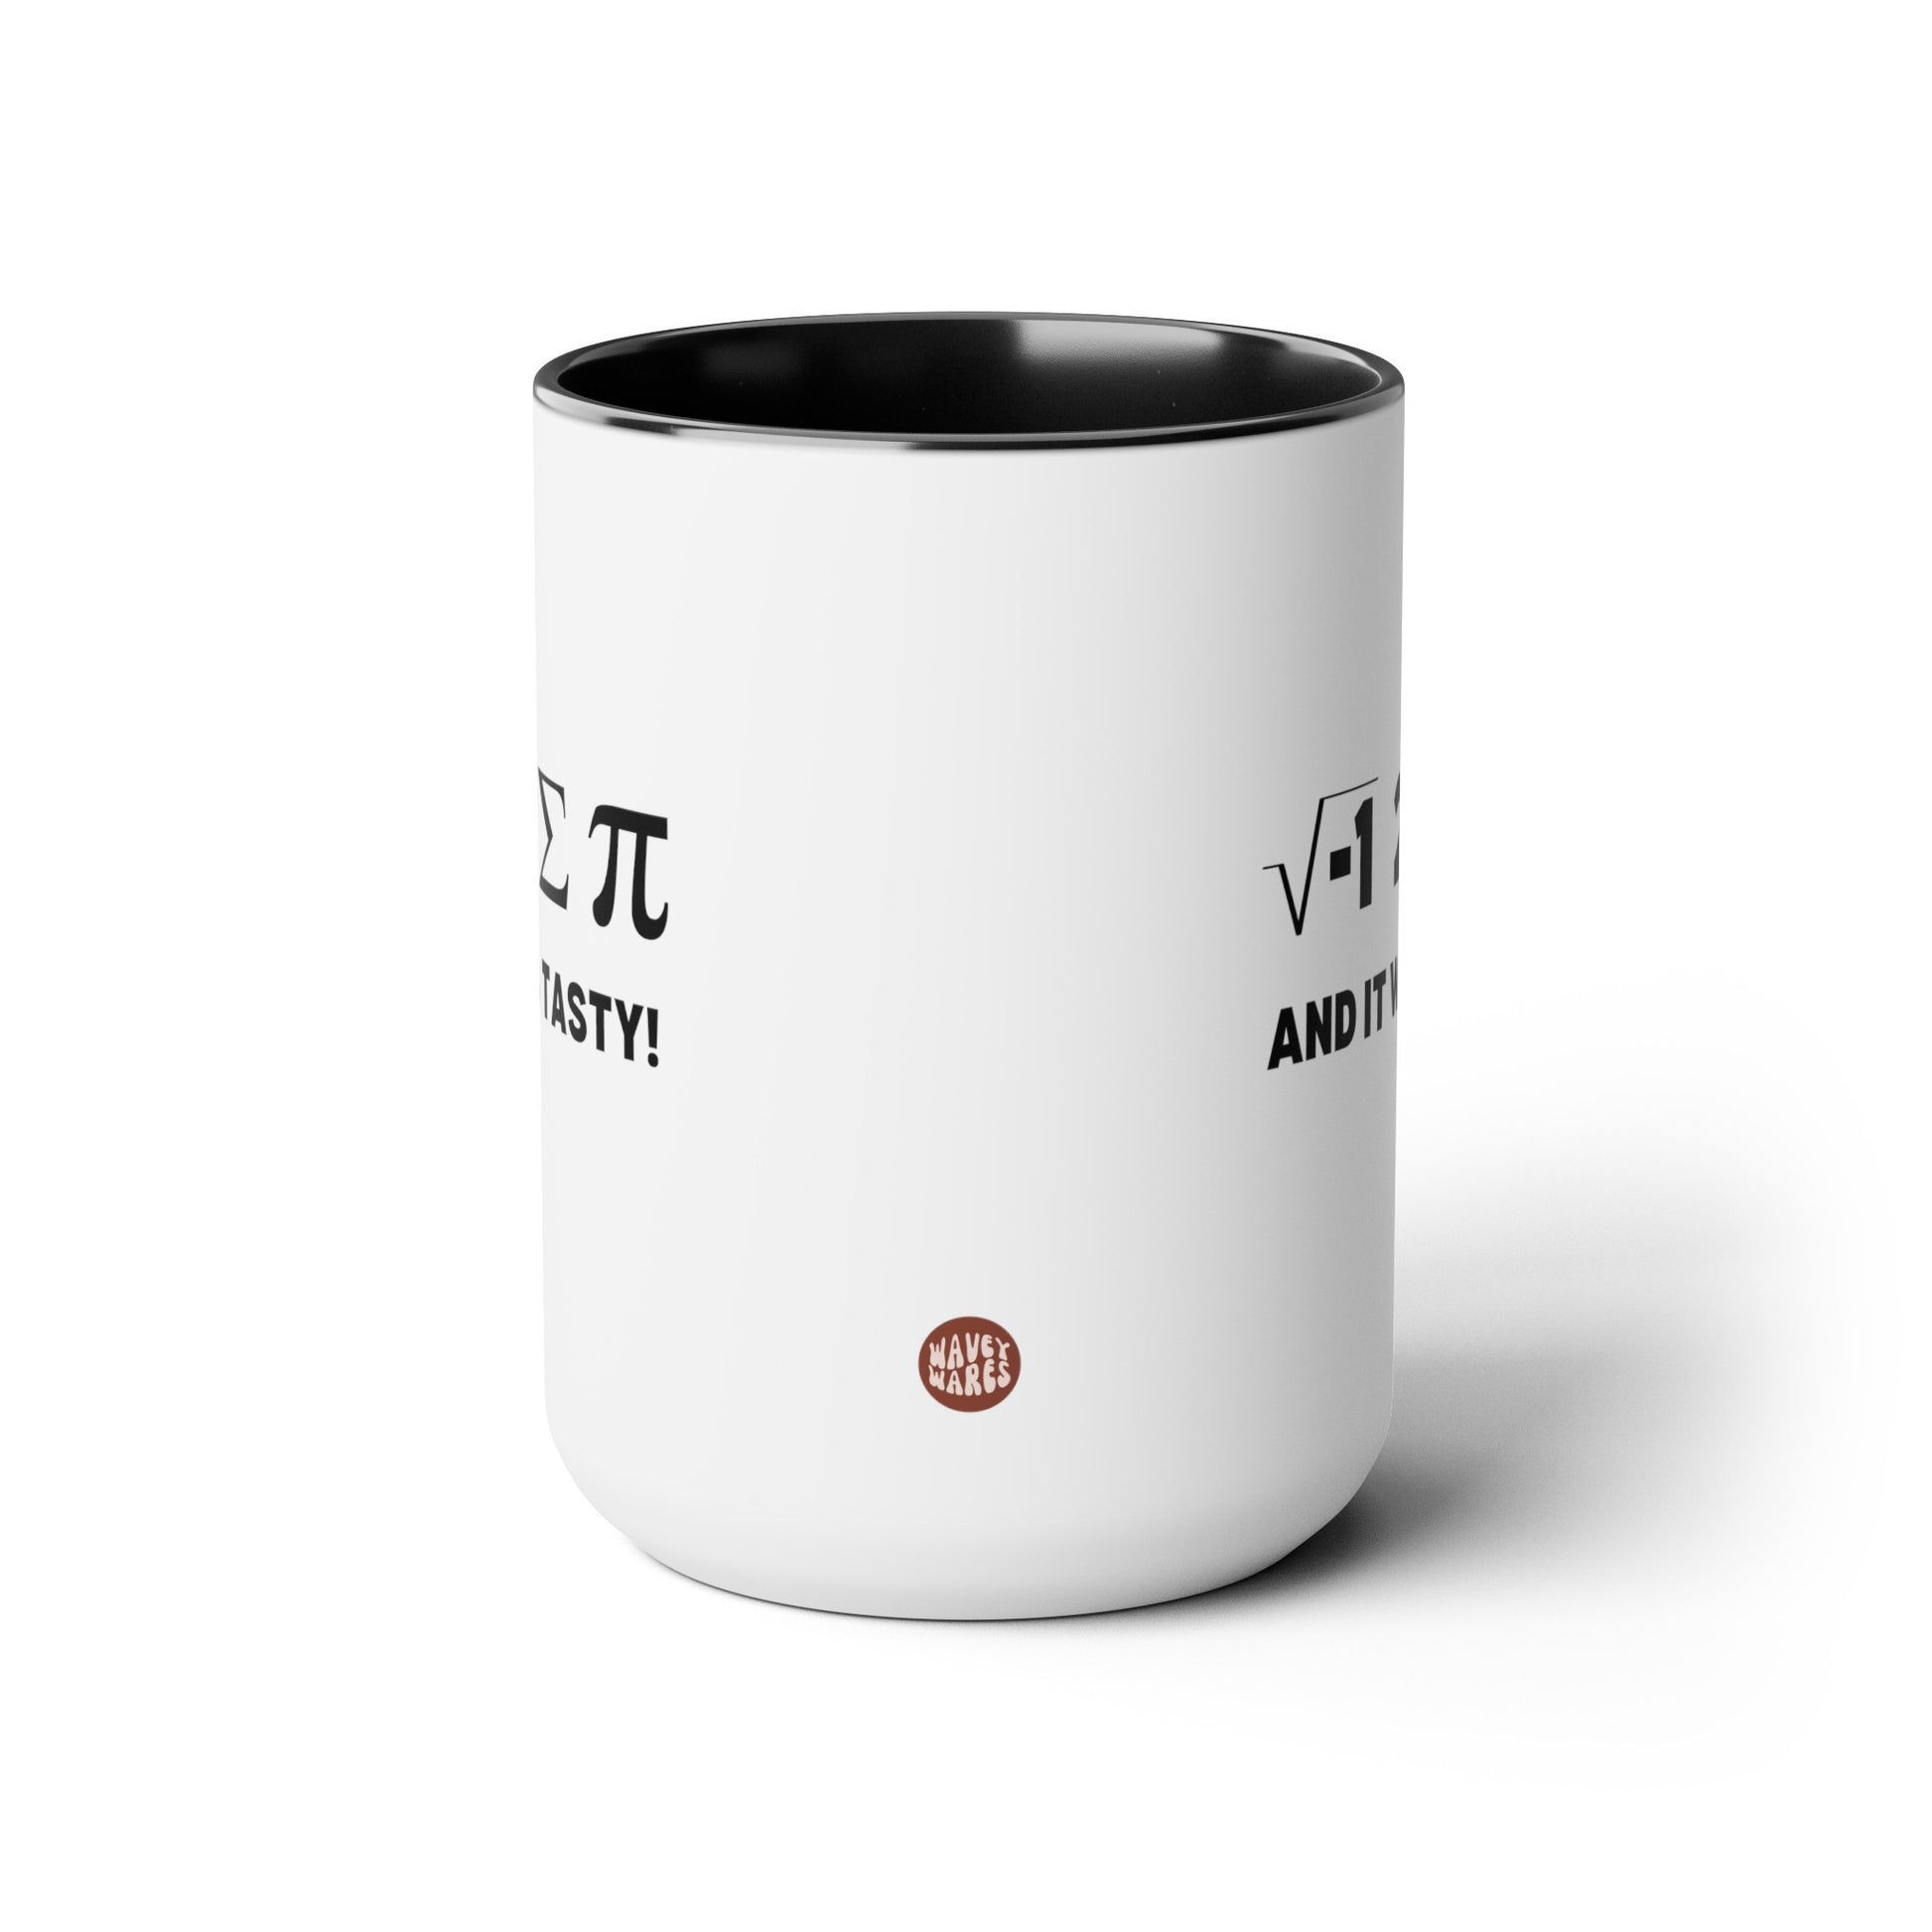 I Ate Some Pie And It Was Tasty 15oz white with black accent funny large coffee mug gift for math lover teacher geek nerdy science nerd novelty equations formula pun waveywares wavey wares wavywares wavy wares side